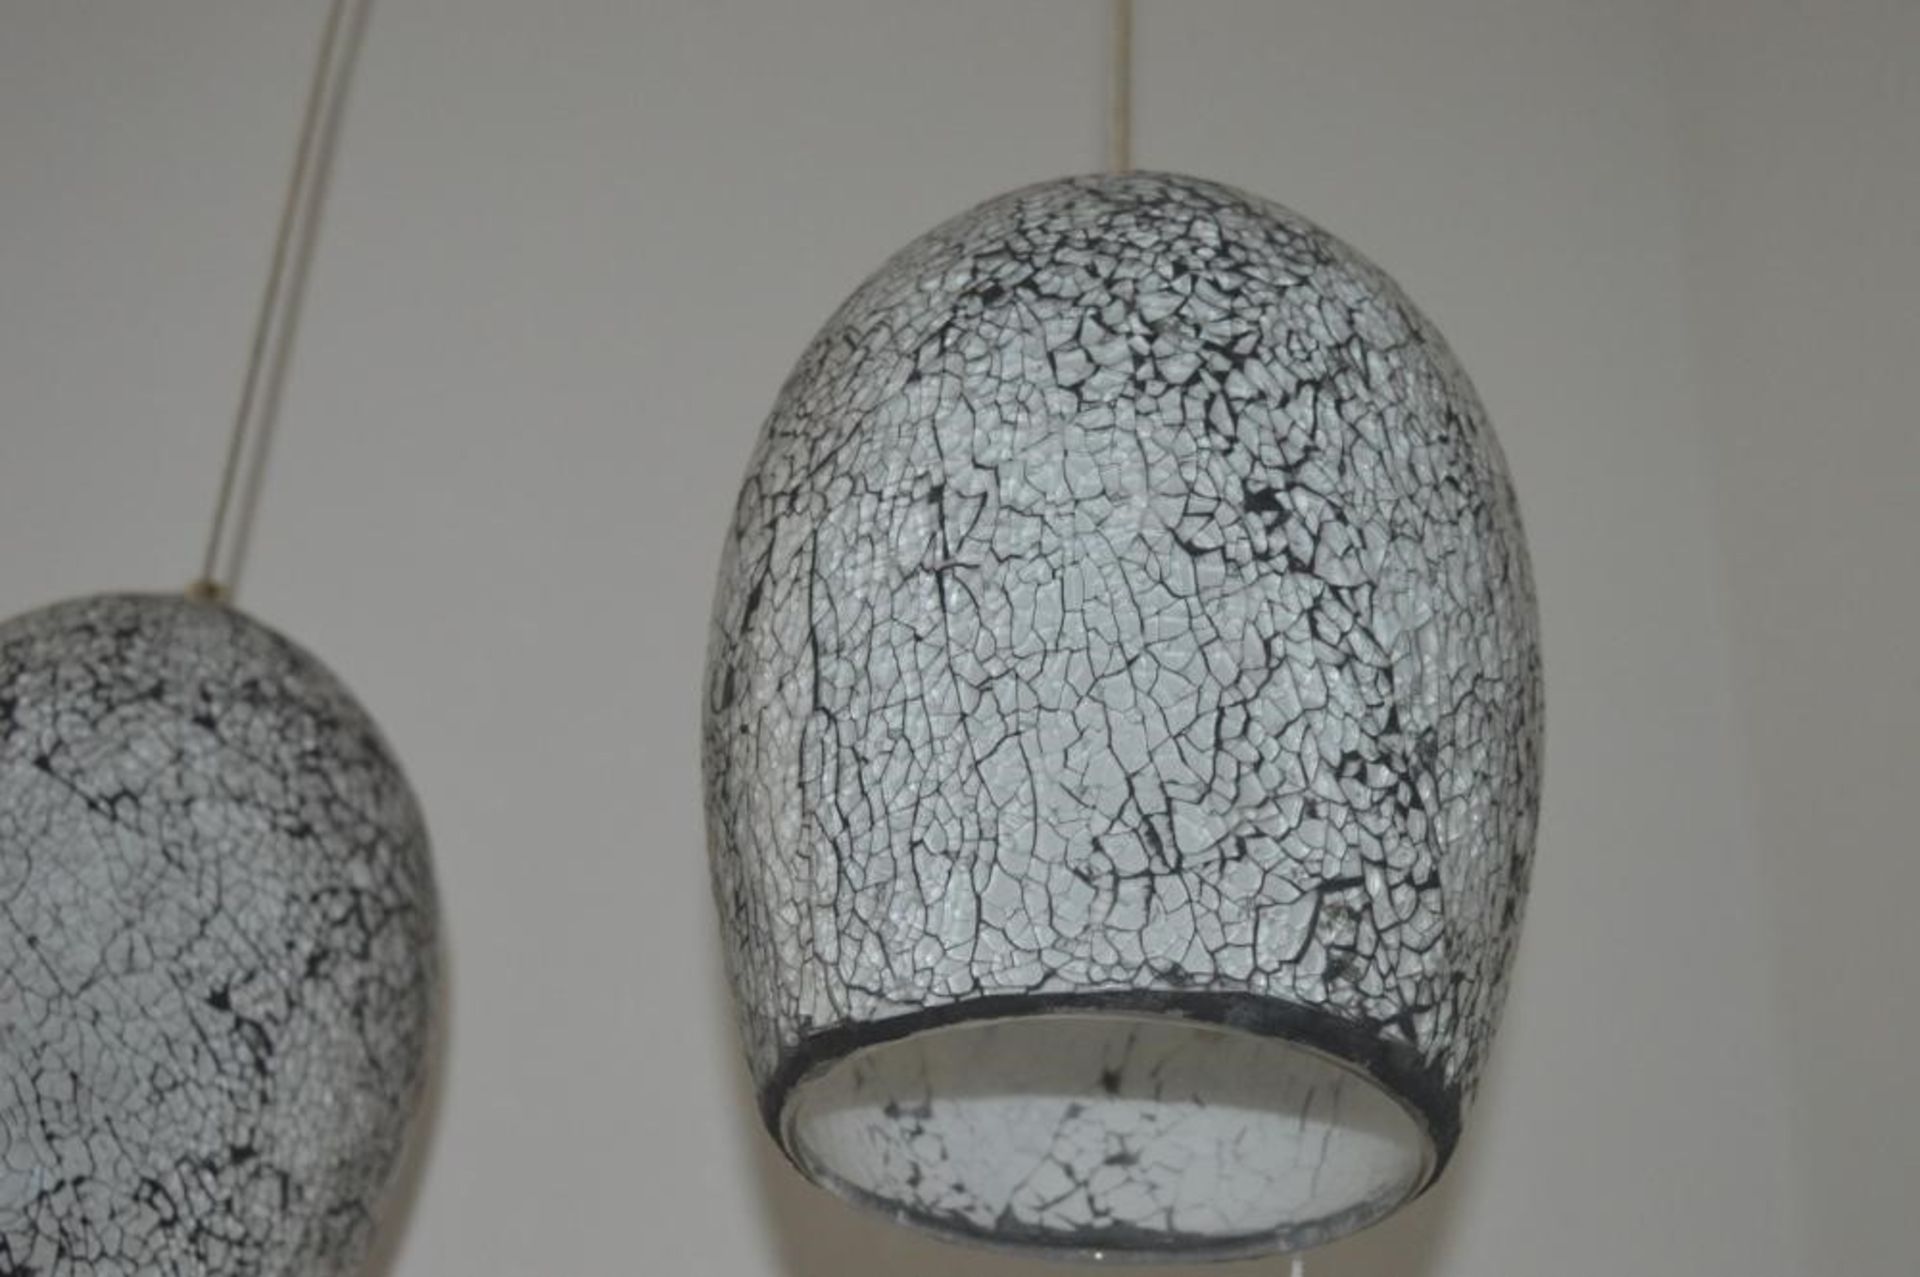 1 x Crackle White Mosaic Glass 3 Light Fitting With Dome Shades and Satin Silver Trim - Ex Display S - Image 4 of 5